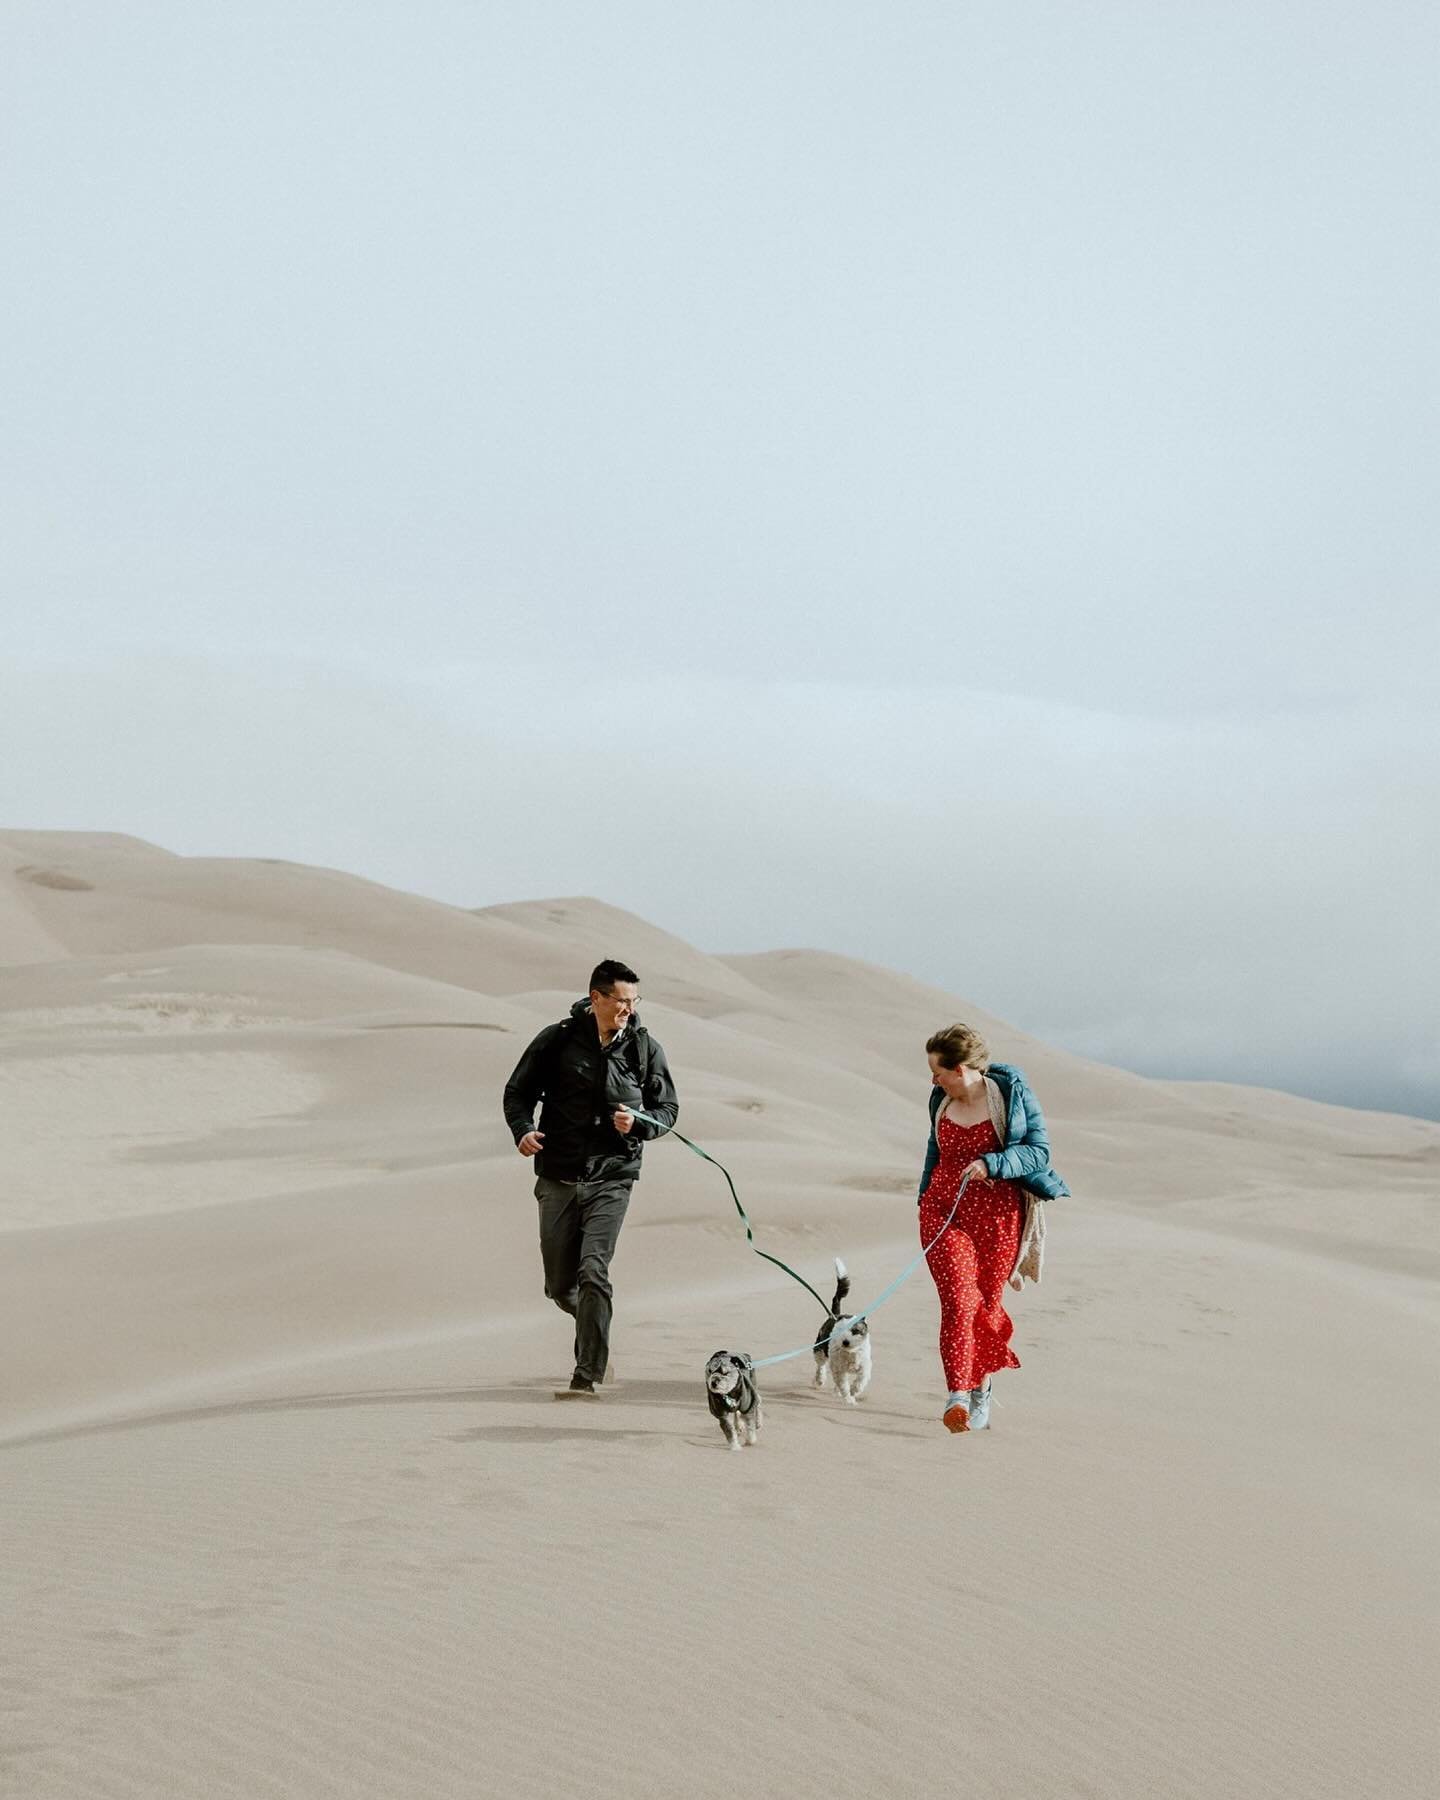 &ldquo;Let&rsquo;s go on an adventure together!&rdquo; It&rsquo;s what I told Steph when we were talking about what their engagement session would look like and she told me her and Brendan have a tradition to go to the Sand Dunes every year. So that&